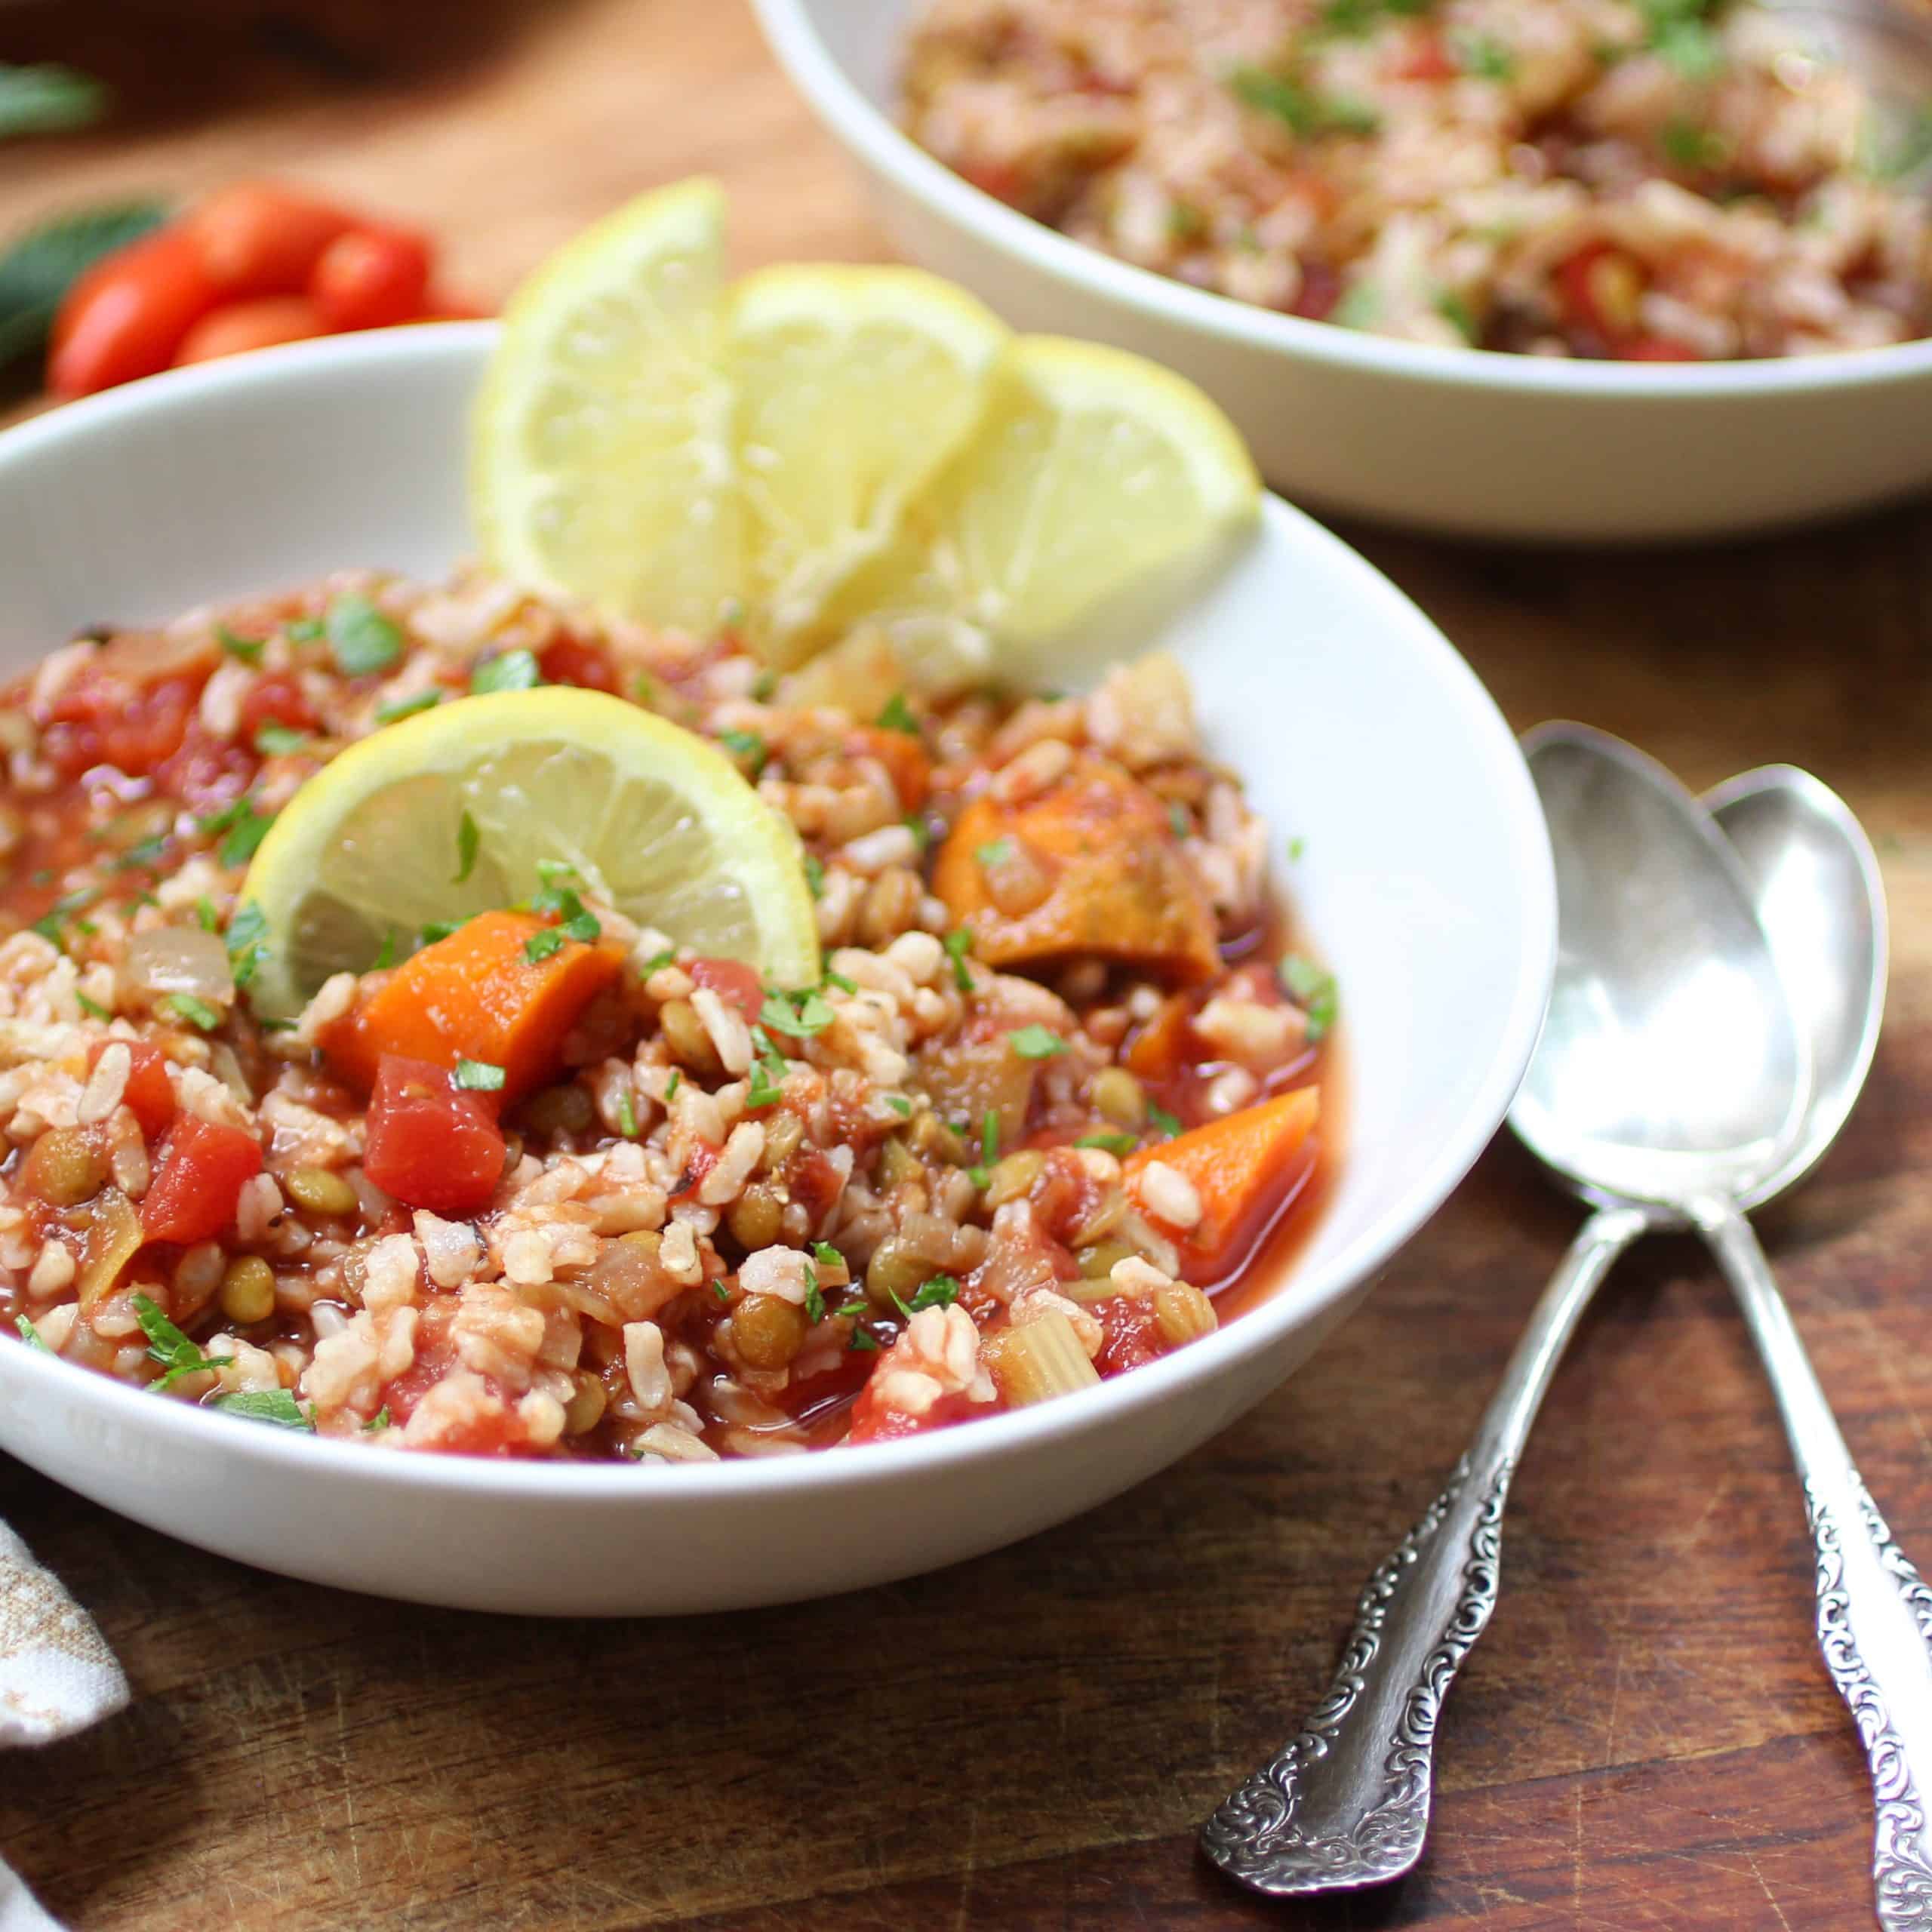 Rice and lentils - oil free!